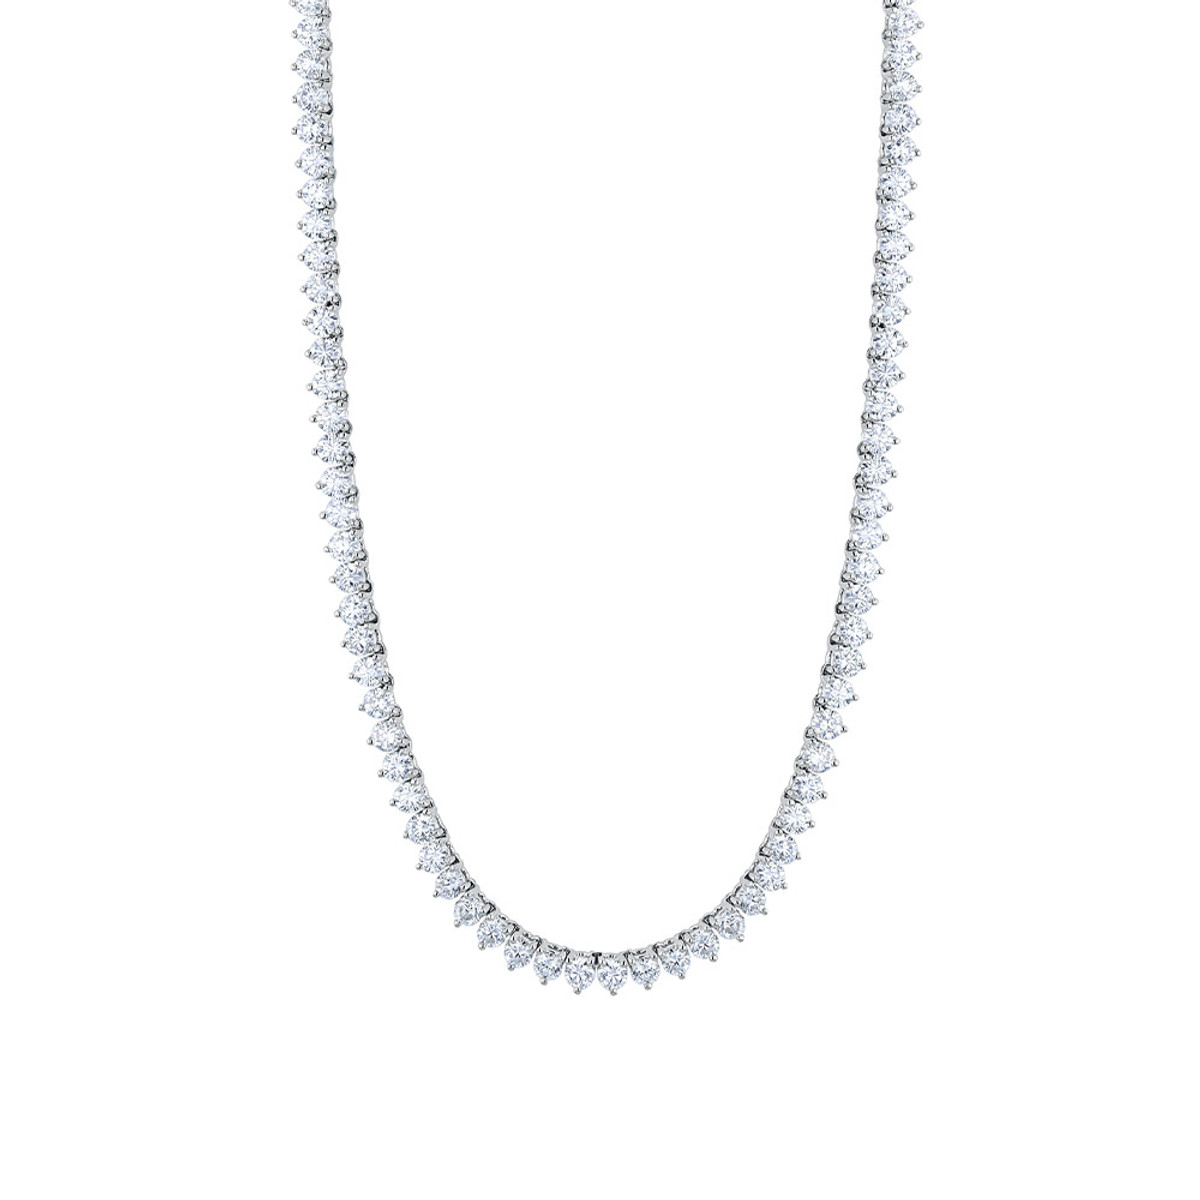 Hyde Park Collection 18K White Gold Diamond Line Necklace-58832 Product Image